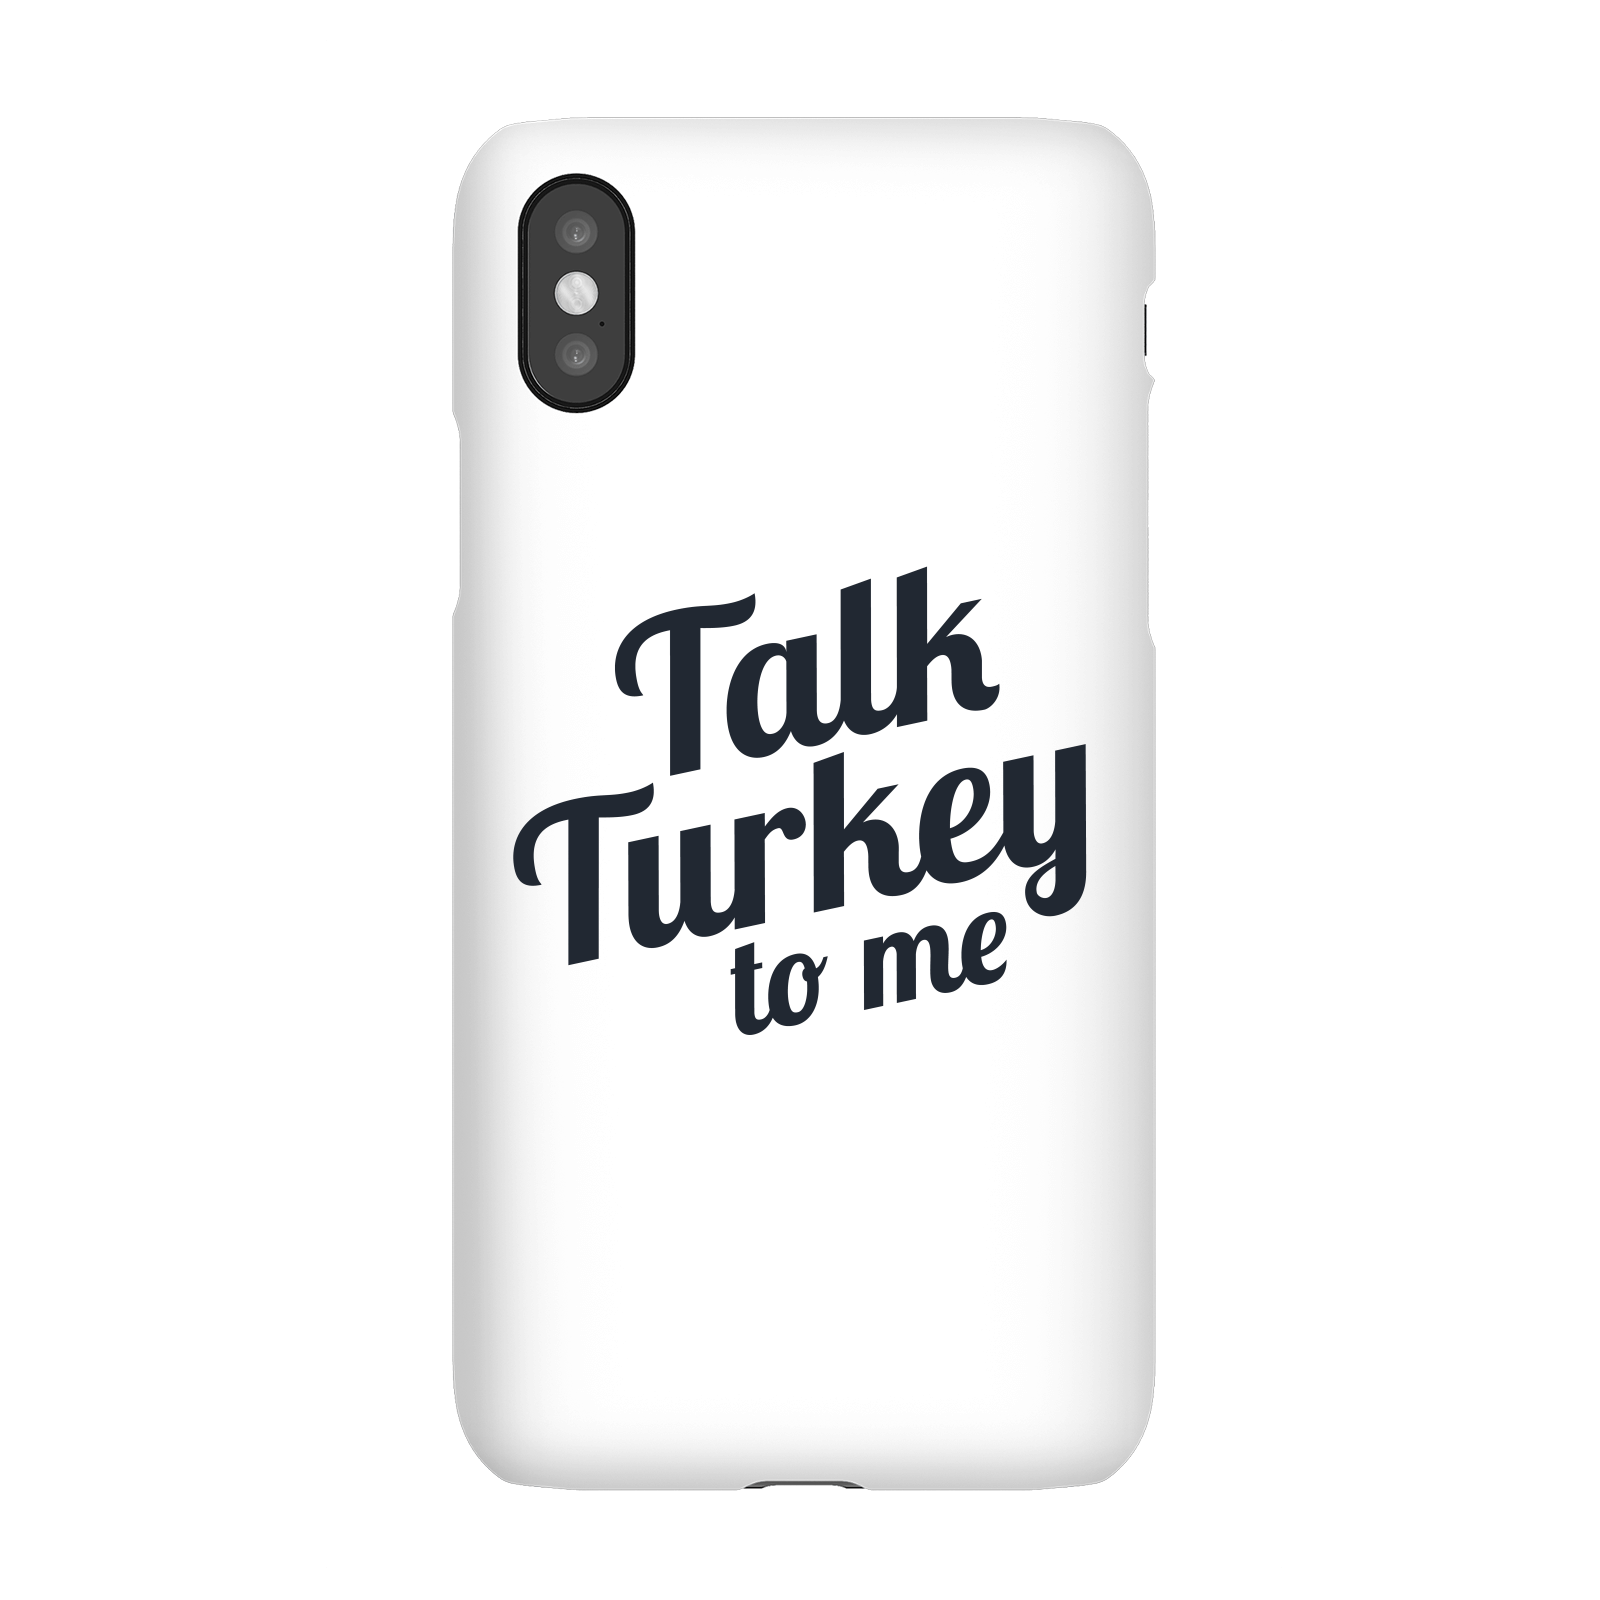 Talk Turkey To Me Phone Case for iPhone and Android - iPhone 5/5s - Snap Case - Matte